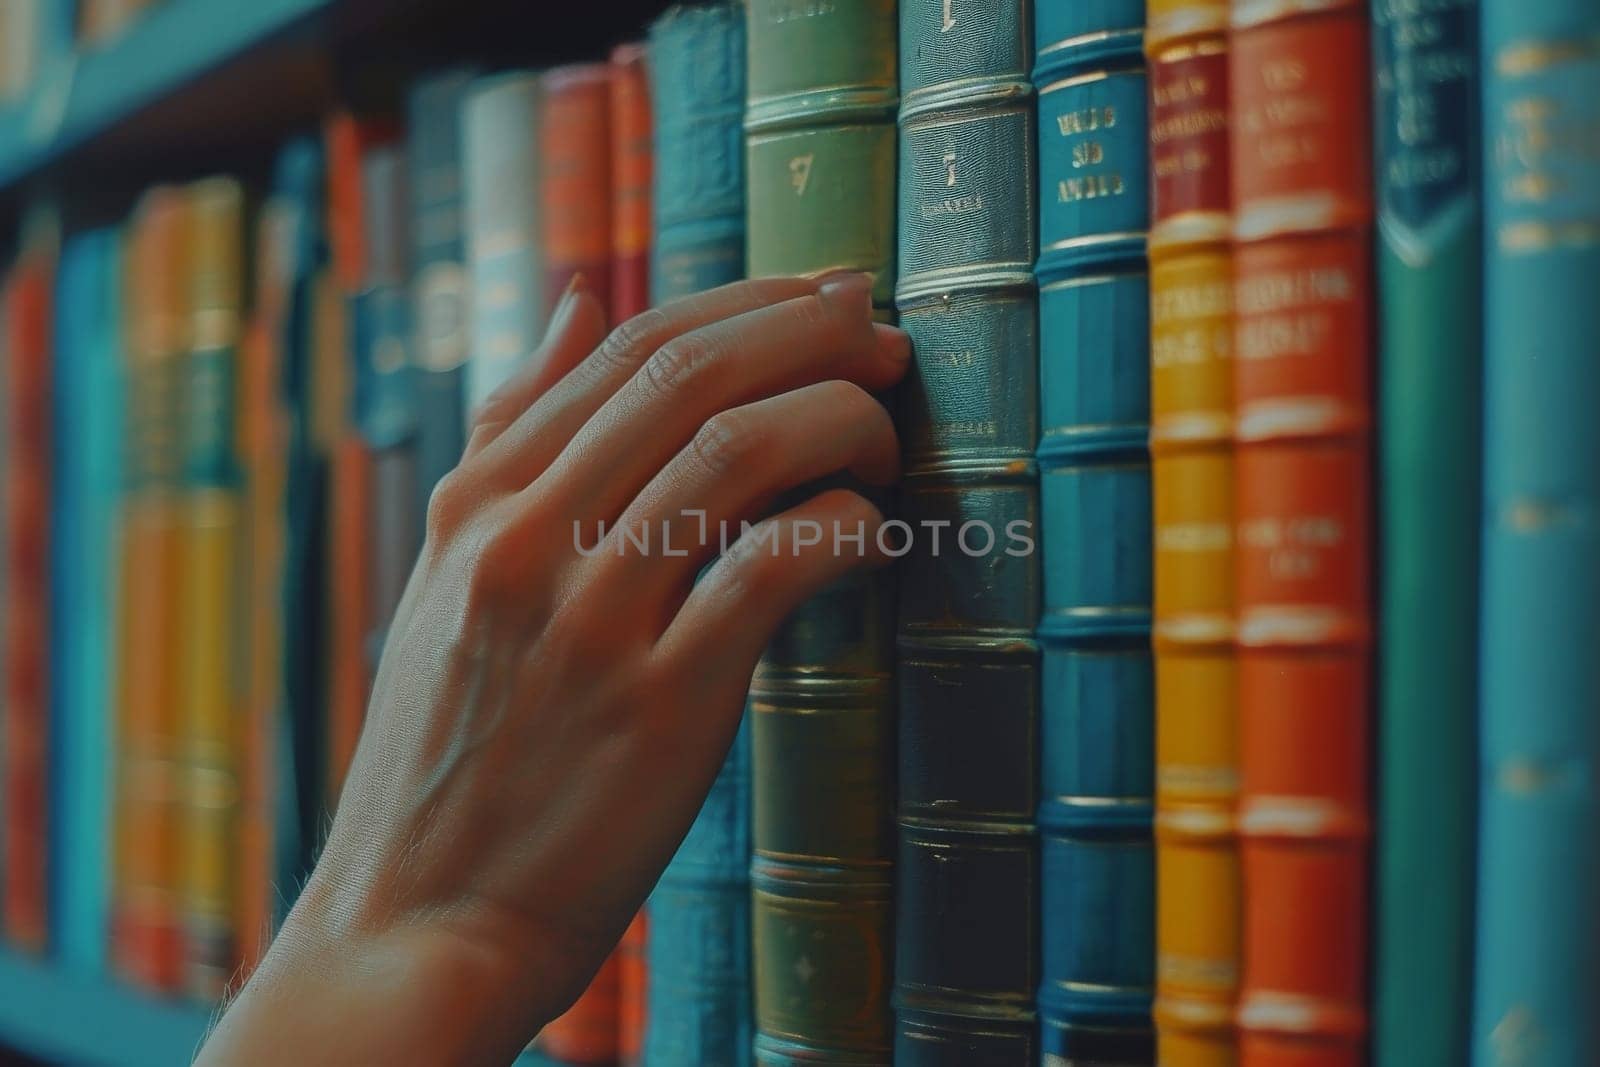 A hand is reaching for a book on a shelf. The books are of different colors and sizes